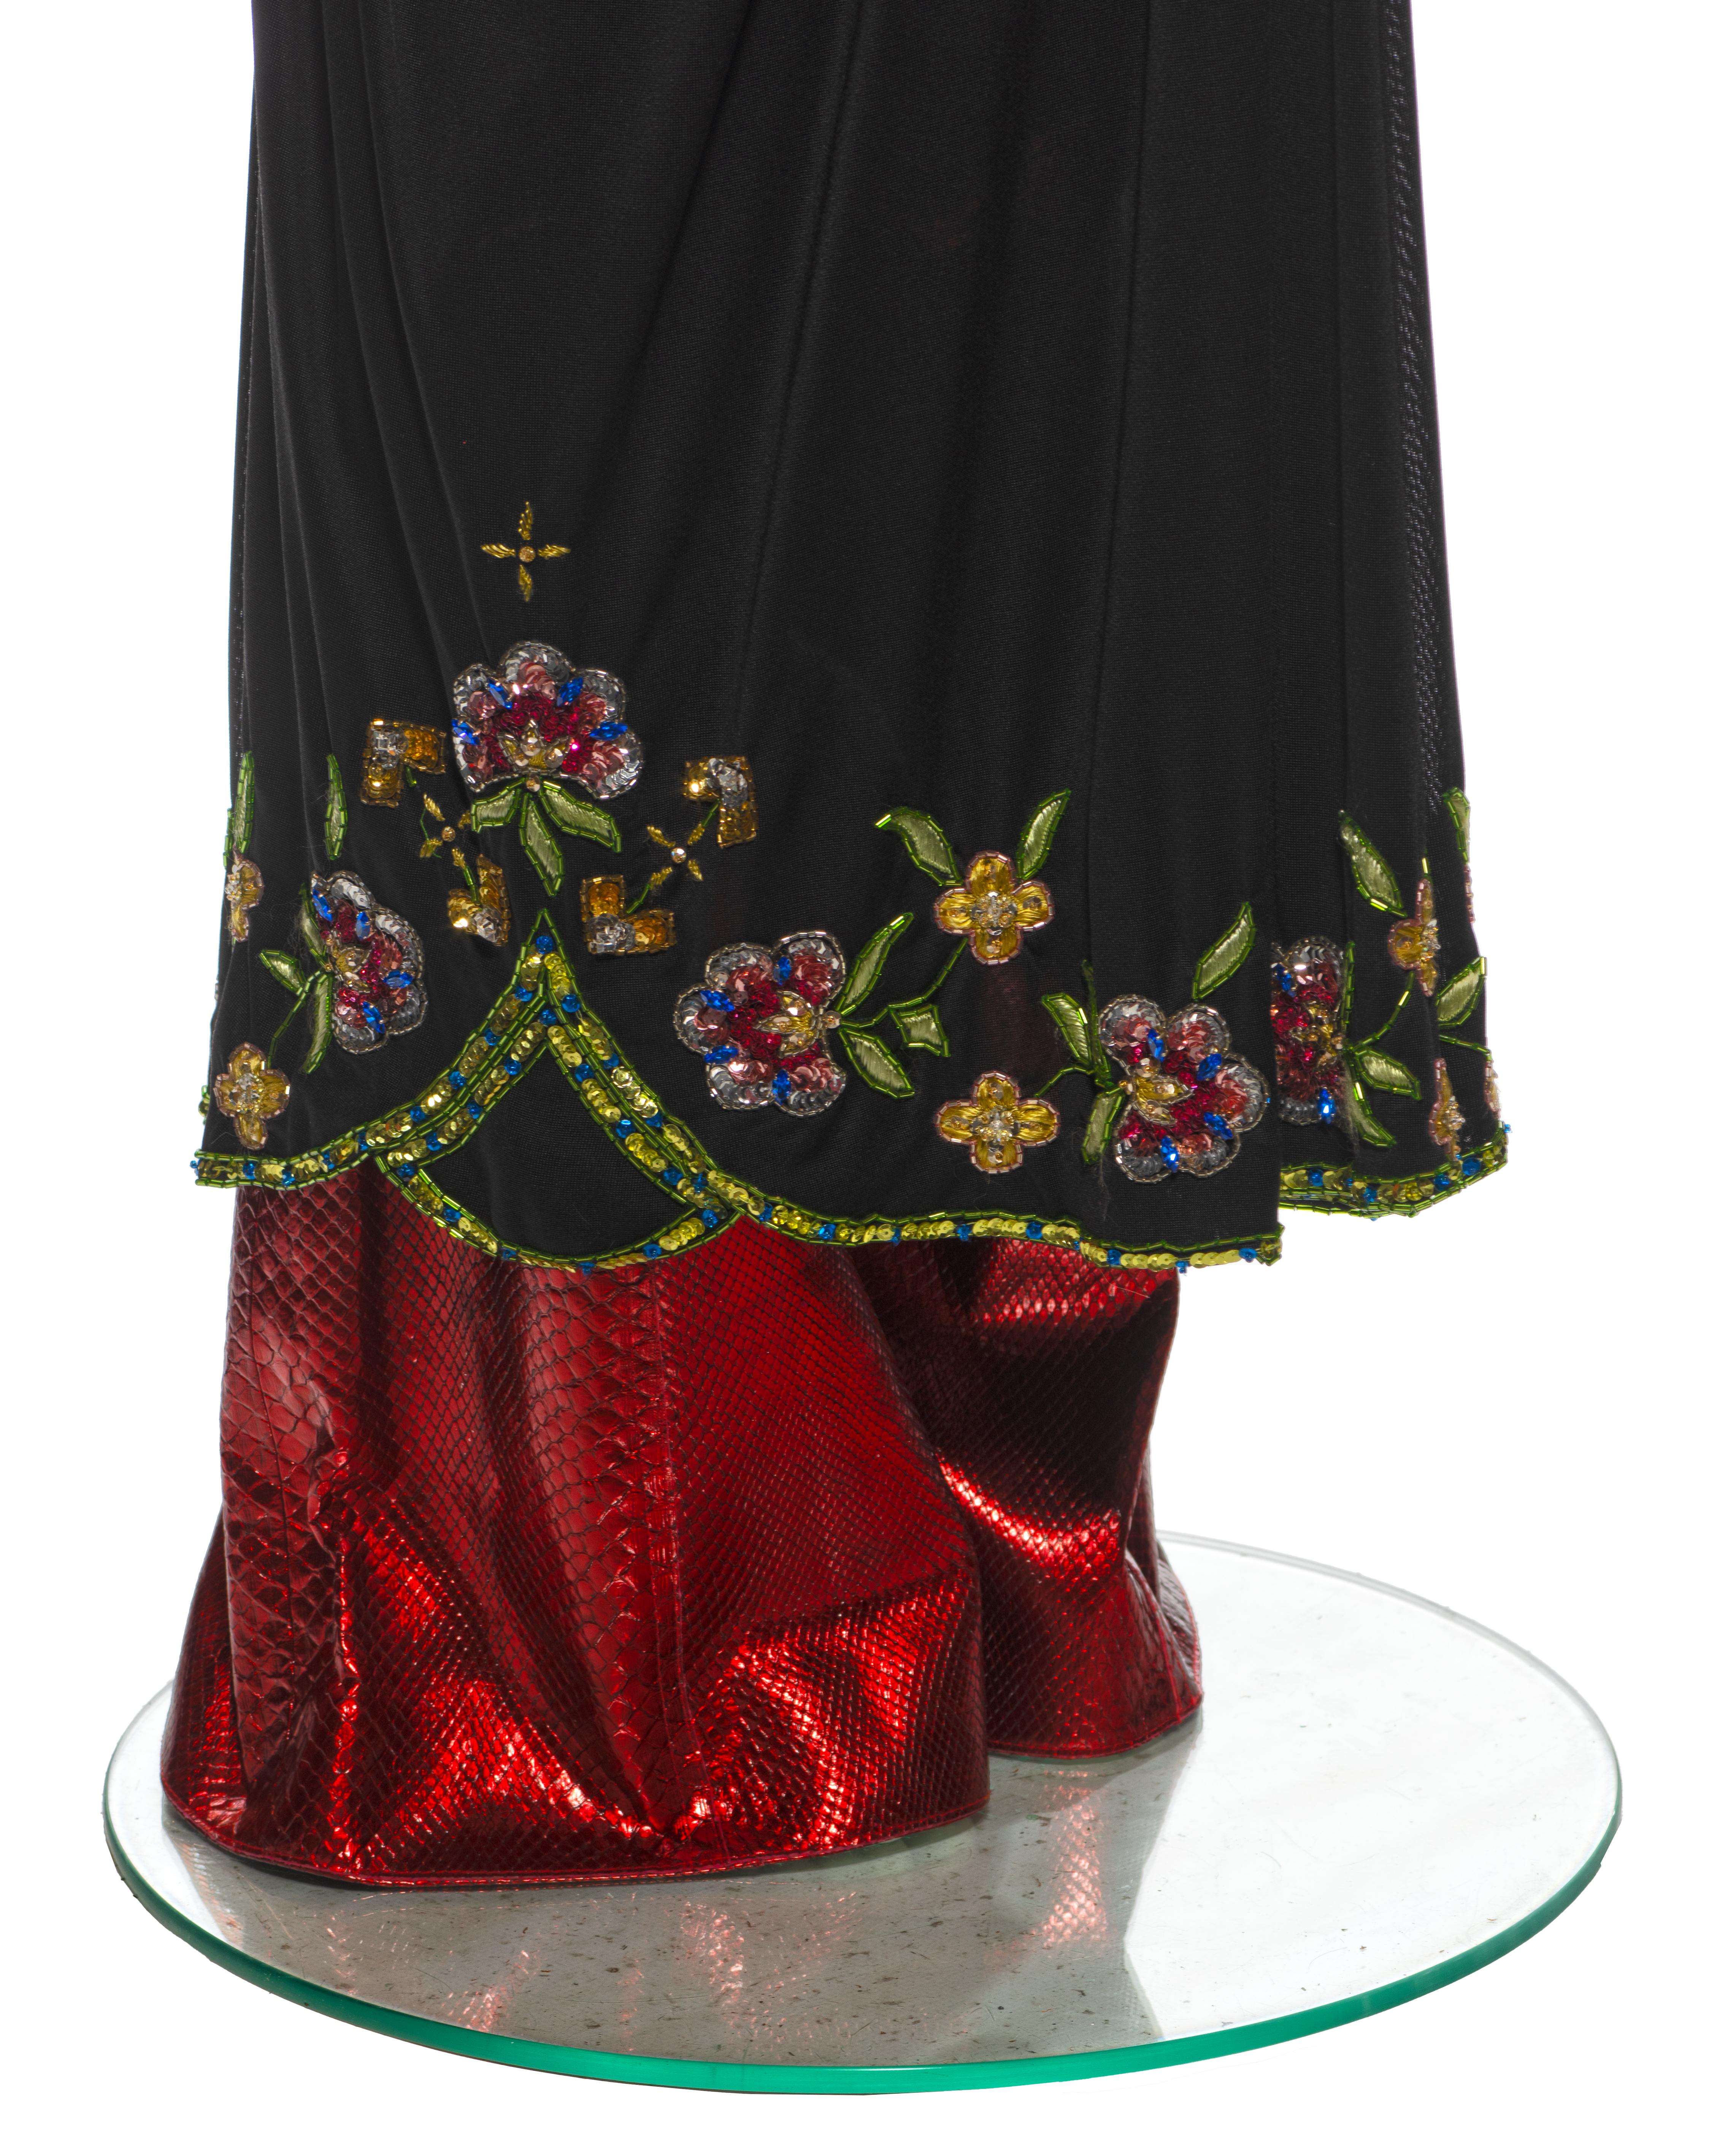 Christian Dior by John Galliano Black Viscose Embellished Draped Dress, ss 2002 For Sale 7